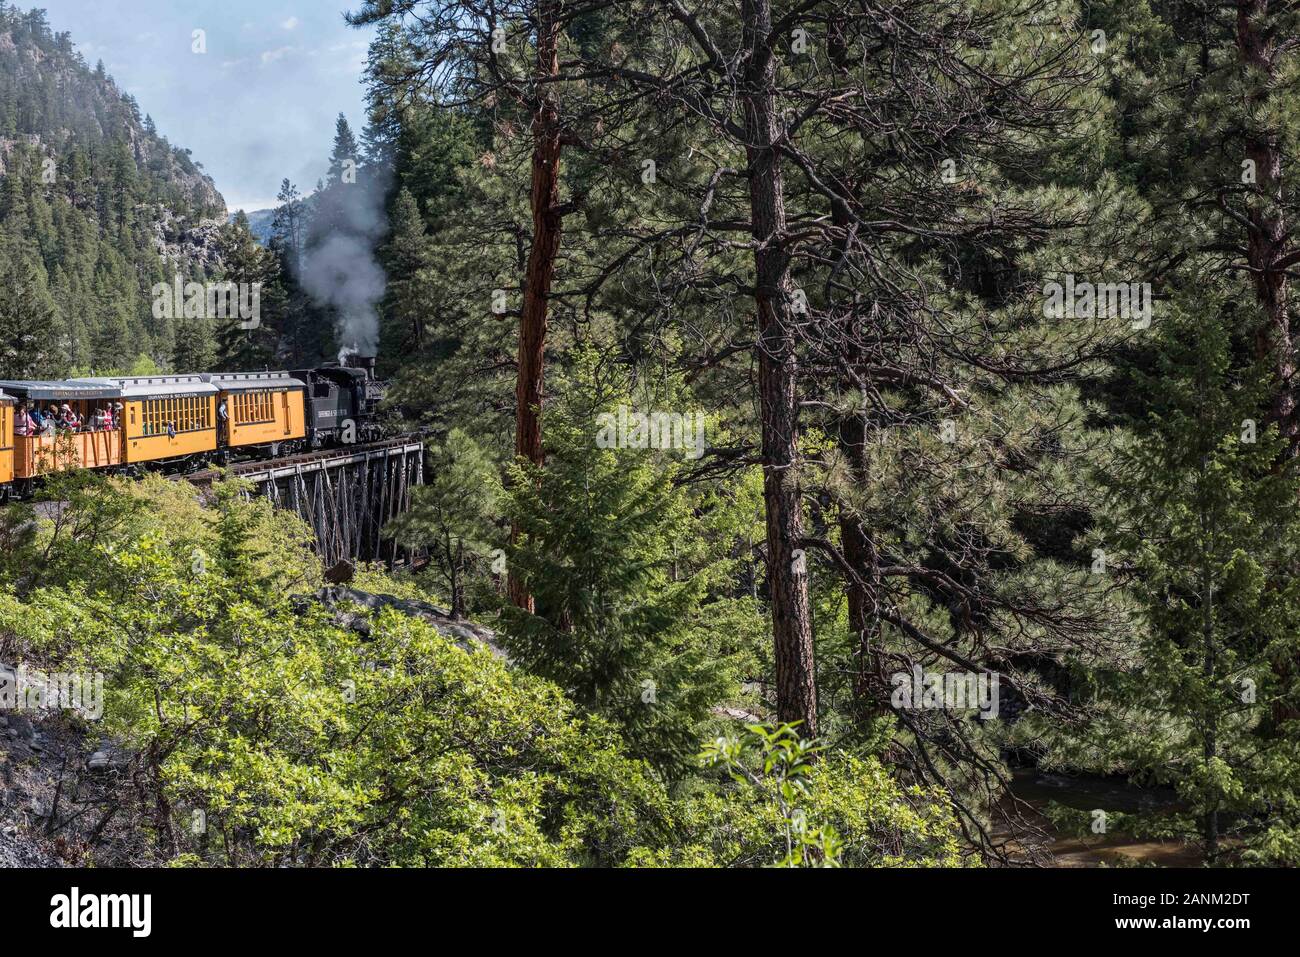 A  Durango & Silverton Narrow Gauge Railroad (D&SNG) train proceeds along the rocky Highline ridge high above the Animas River Valley in La Plata County, Colorado Physical description: 1 photographÂ : digital, tiff file, color.  Notes: The D&SNG is a narrow-gauge railroad that operates 45.2 miles of track between Durango and Silverton in southwest Colorado. The route was originally opened in 1882 by the Denver & Rio Grande Railway to transport silver and gold ore mined from the San Juan Mountains. The line has run continuously since 1881, and some rolling stock dates to then. It Stock Photo